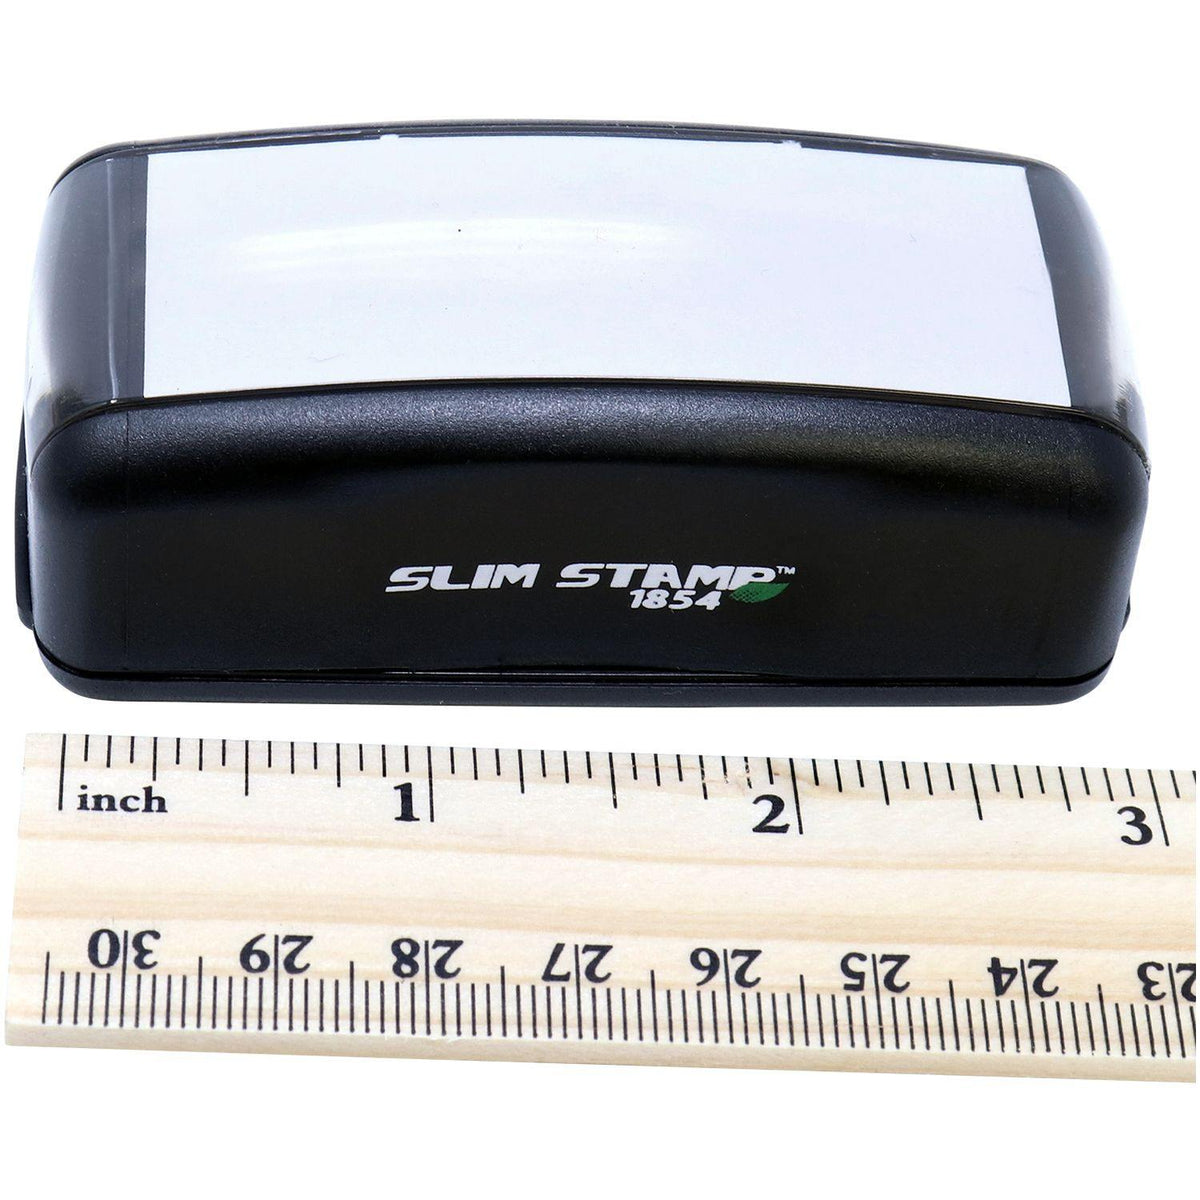 Measurement Large Pre Inked Promoted Stamp with Ruler